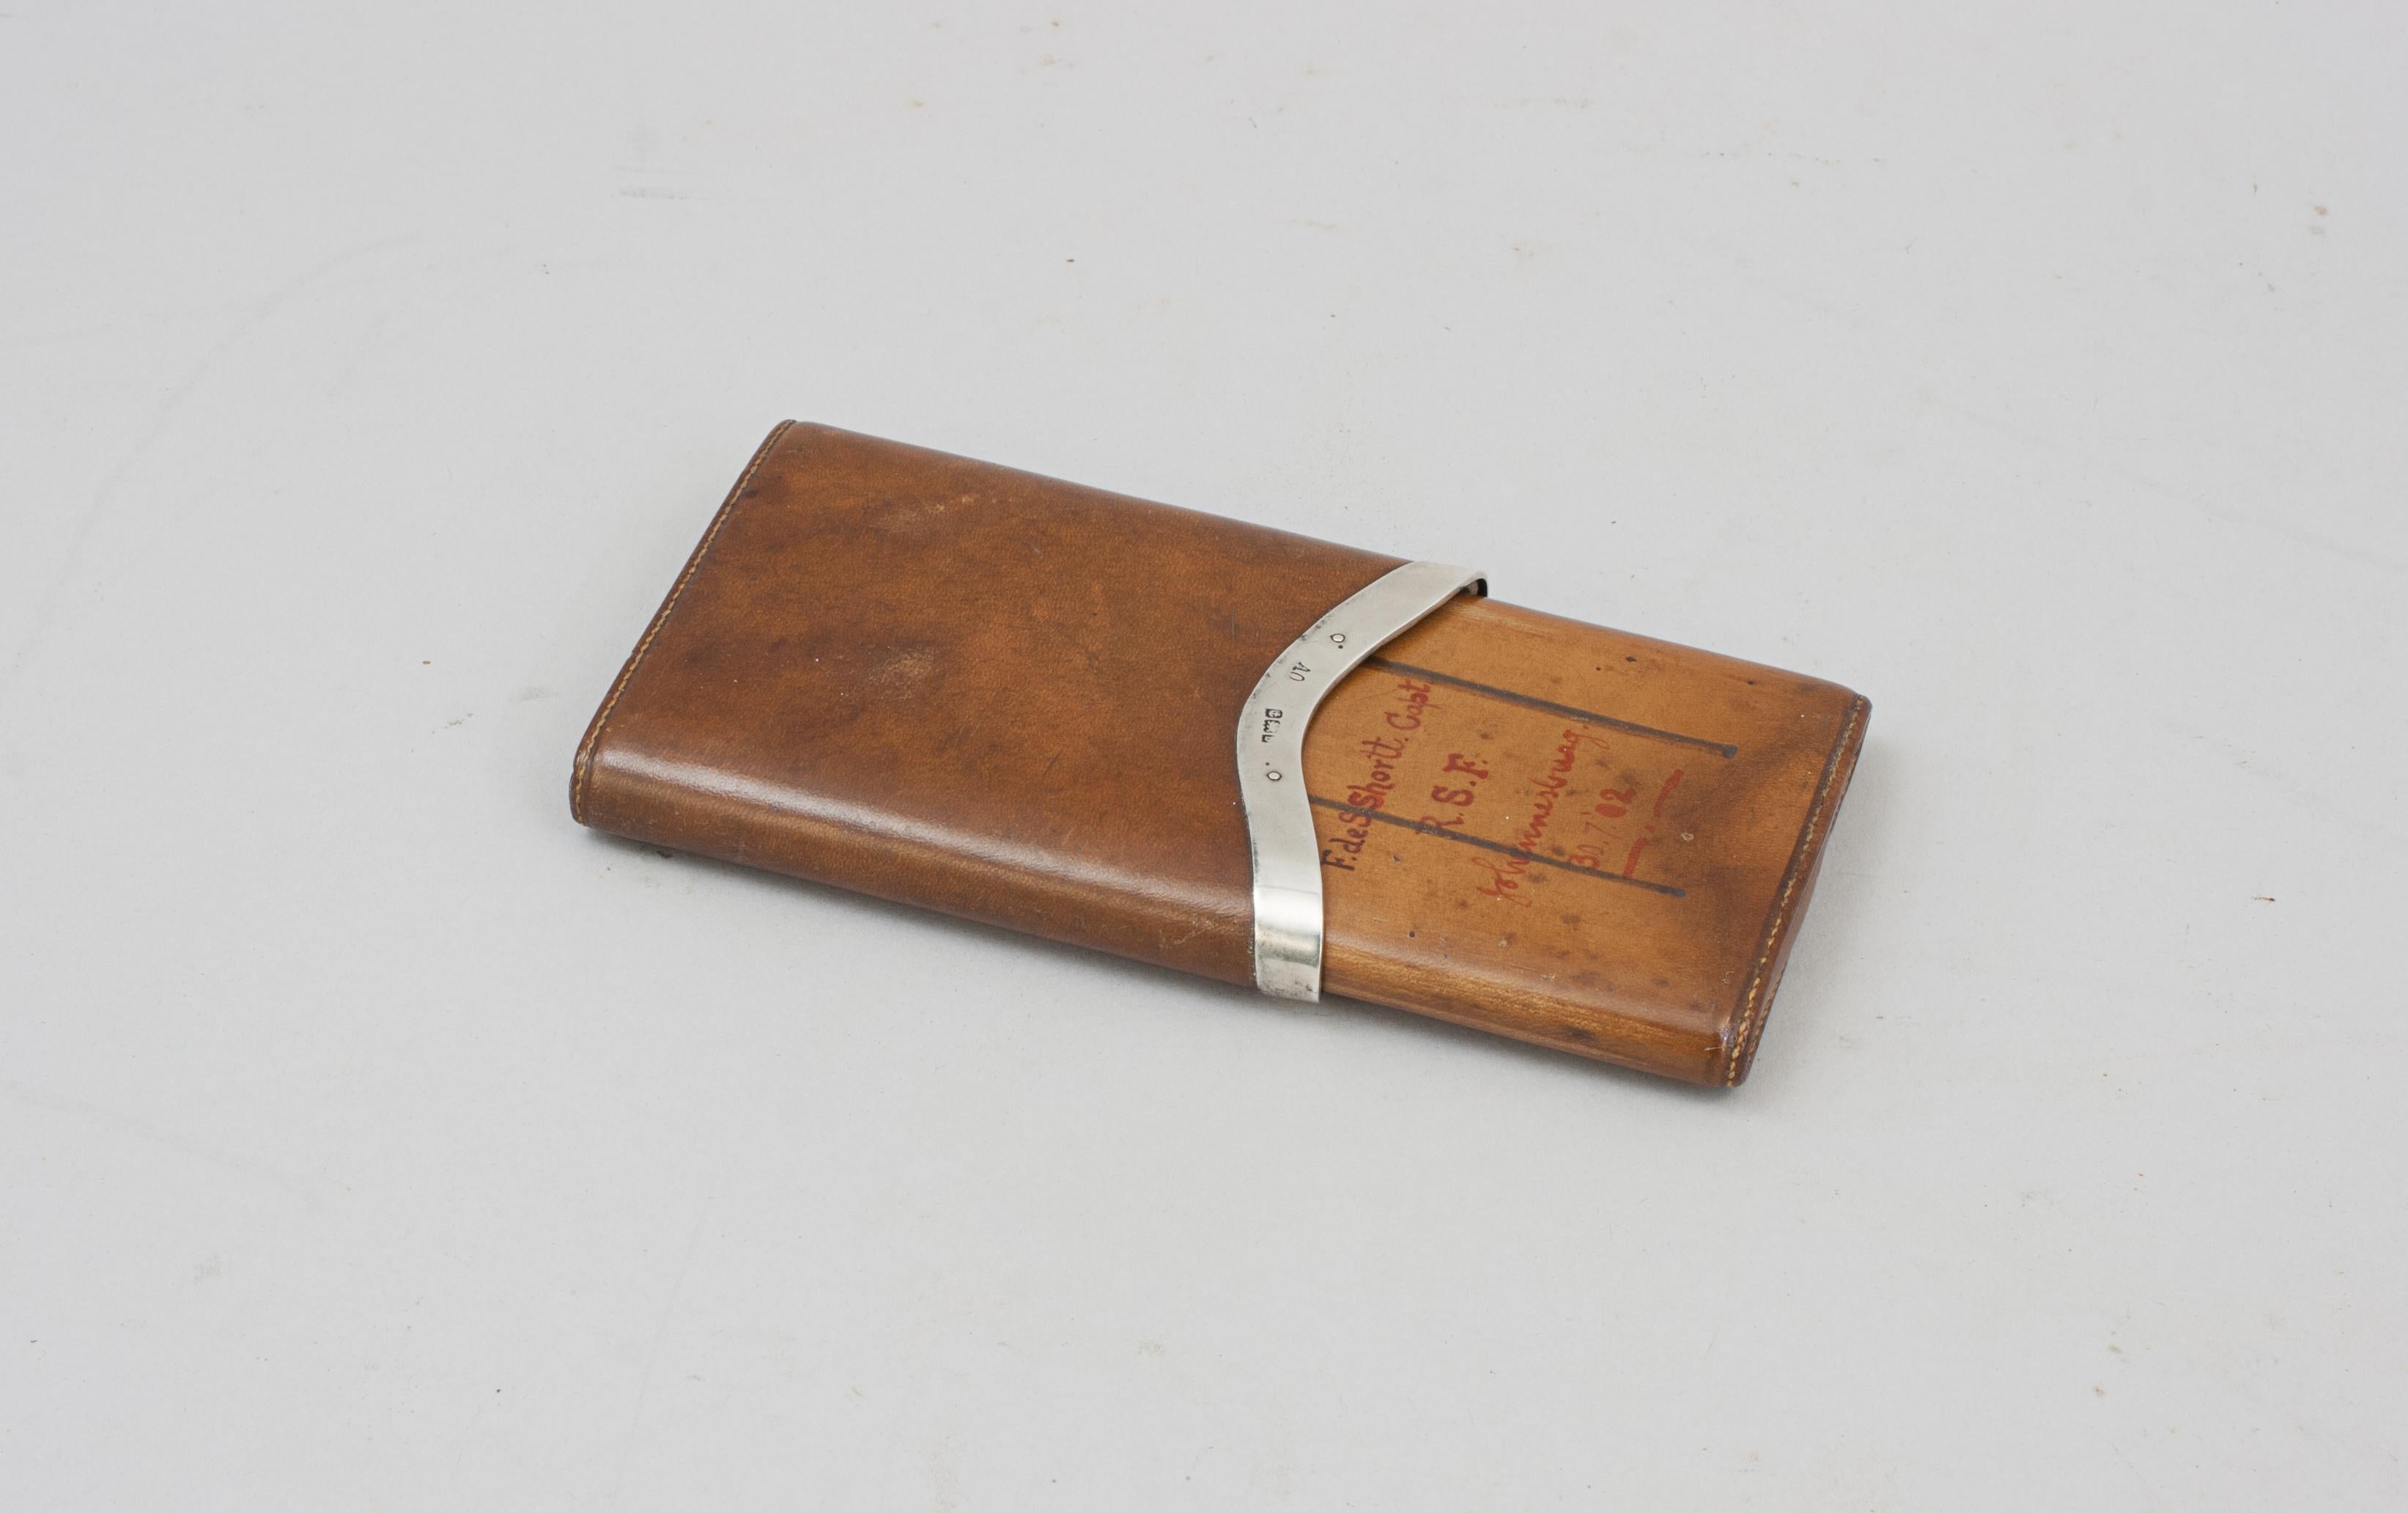 Leather Cigarette Case With Silver Fittings.
A fine leather two-part cigarette case with a good silver mount. The mount is hallmarked, Birmingham 1901, with makers initials AO, probably Adolphe Oppenheimer & Co. The inner slide has written in red